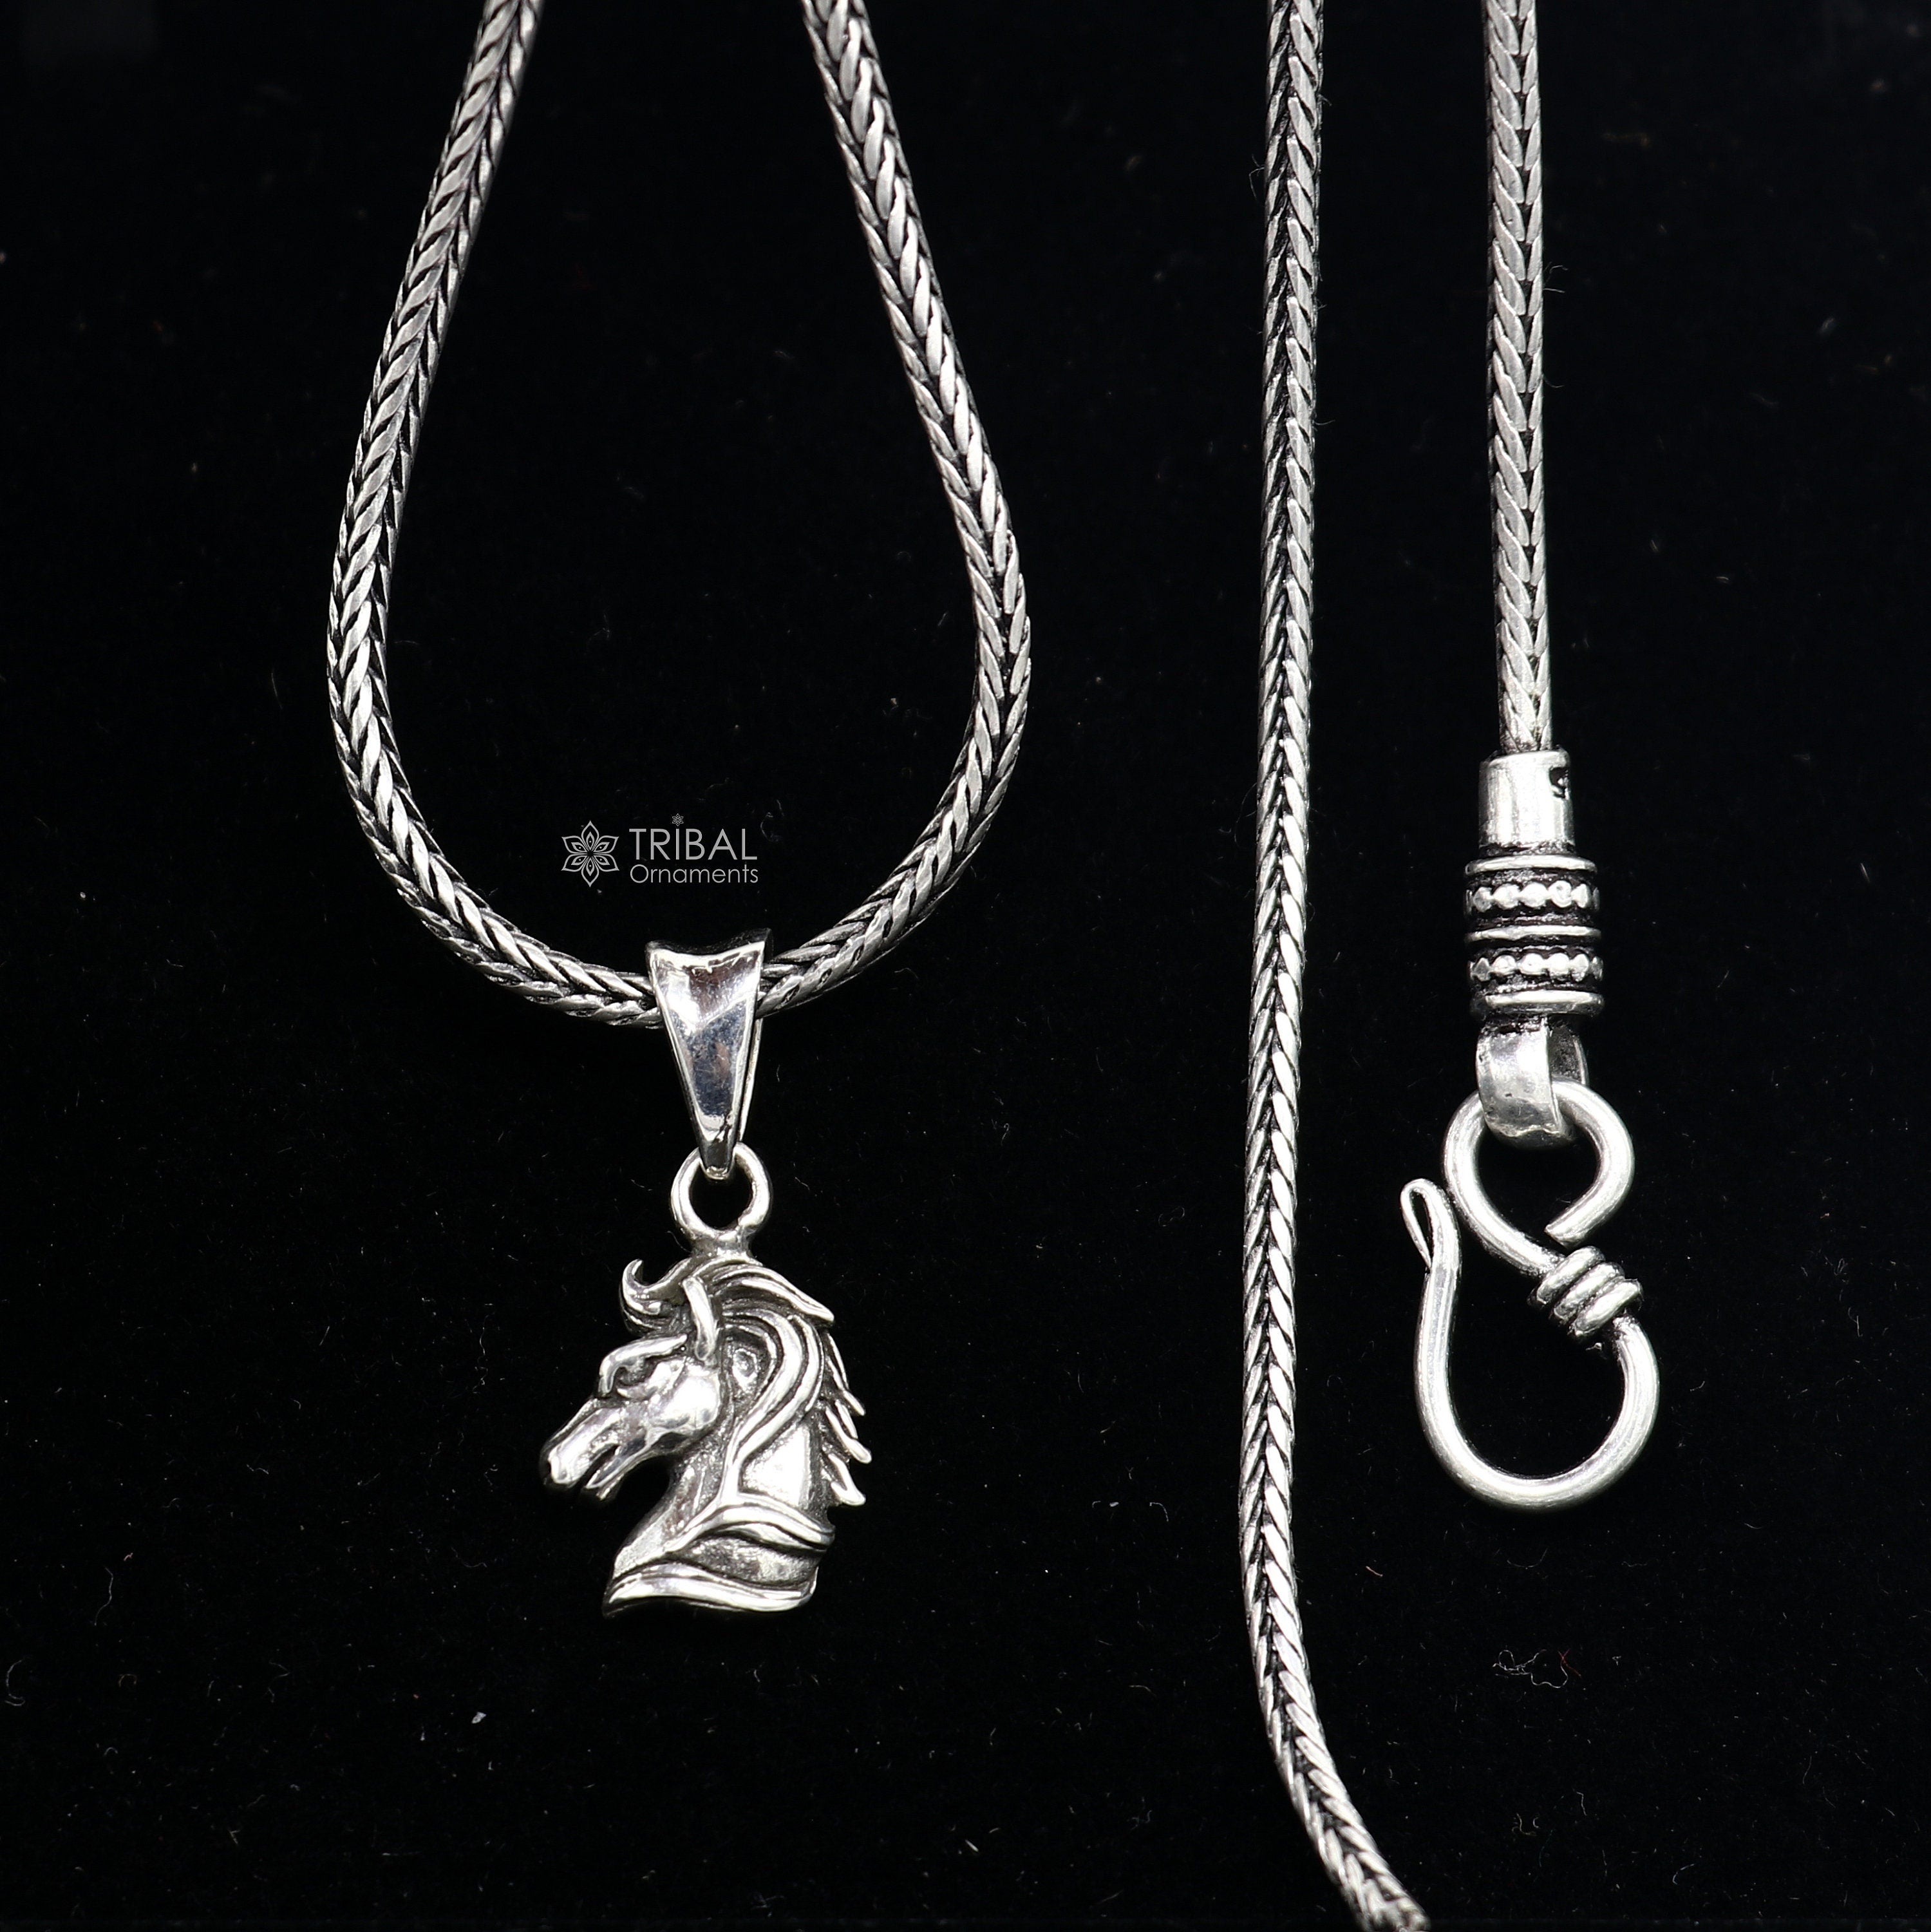 Horse jewellery perfect for gifts or to treat yourself | Horse & Hound